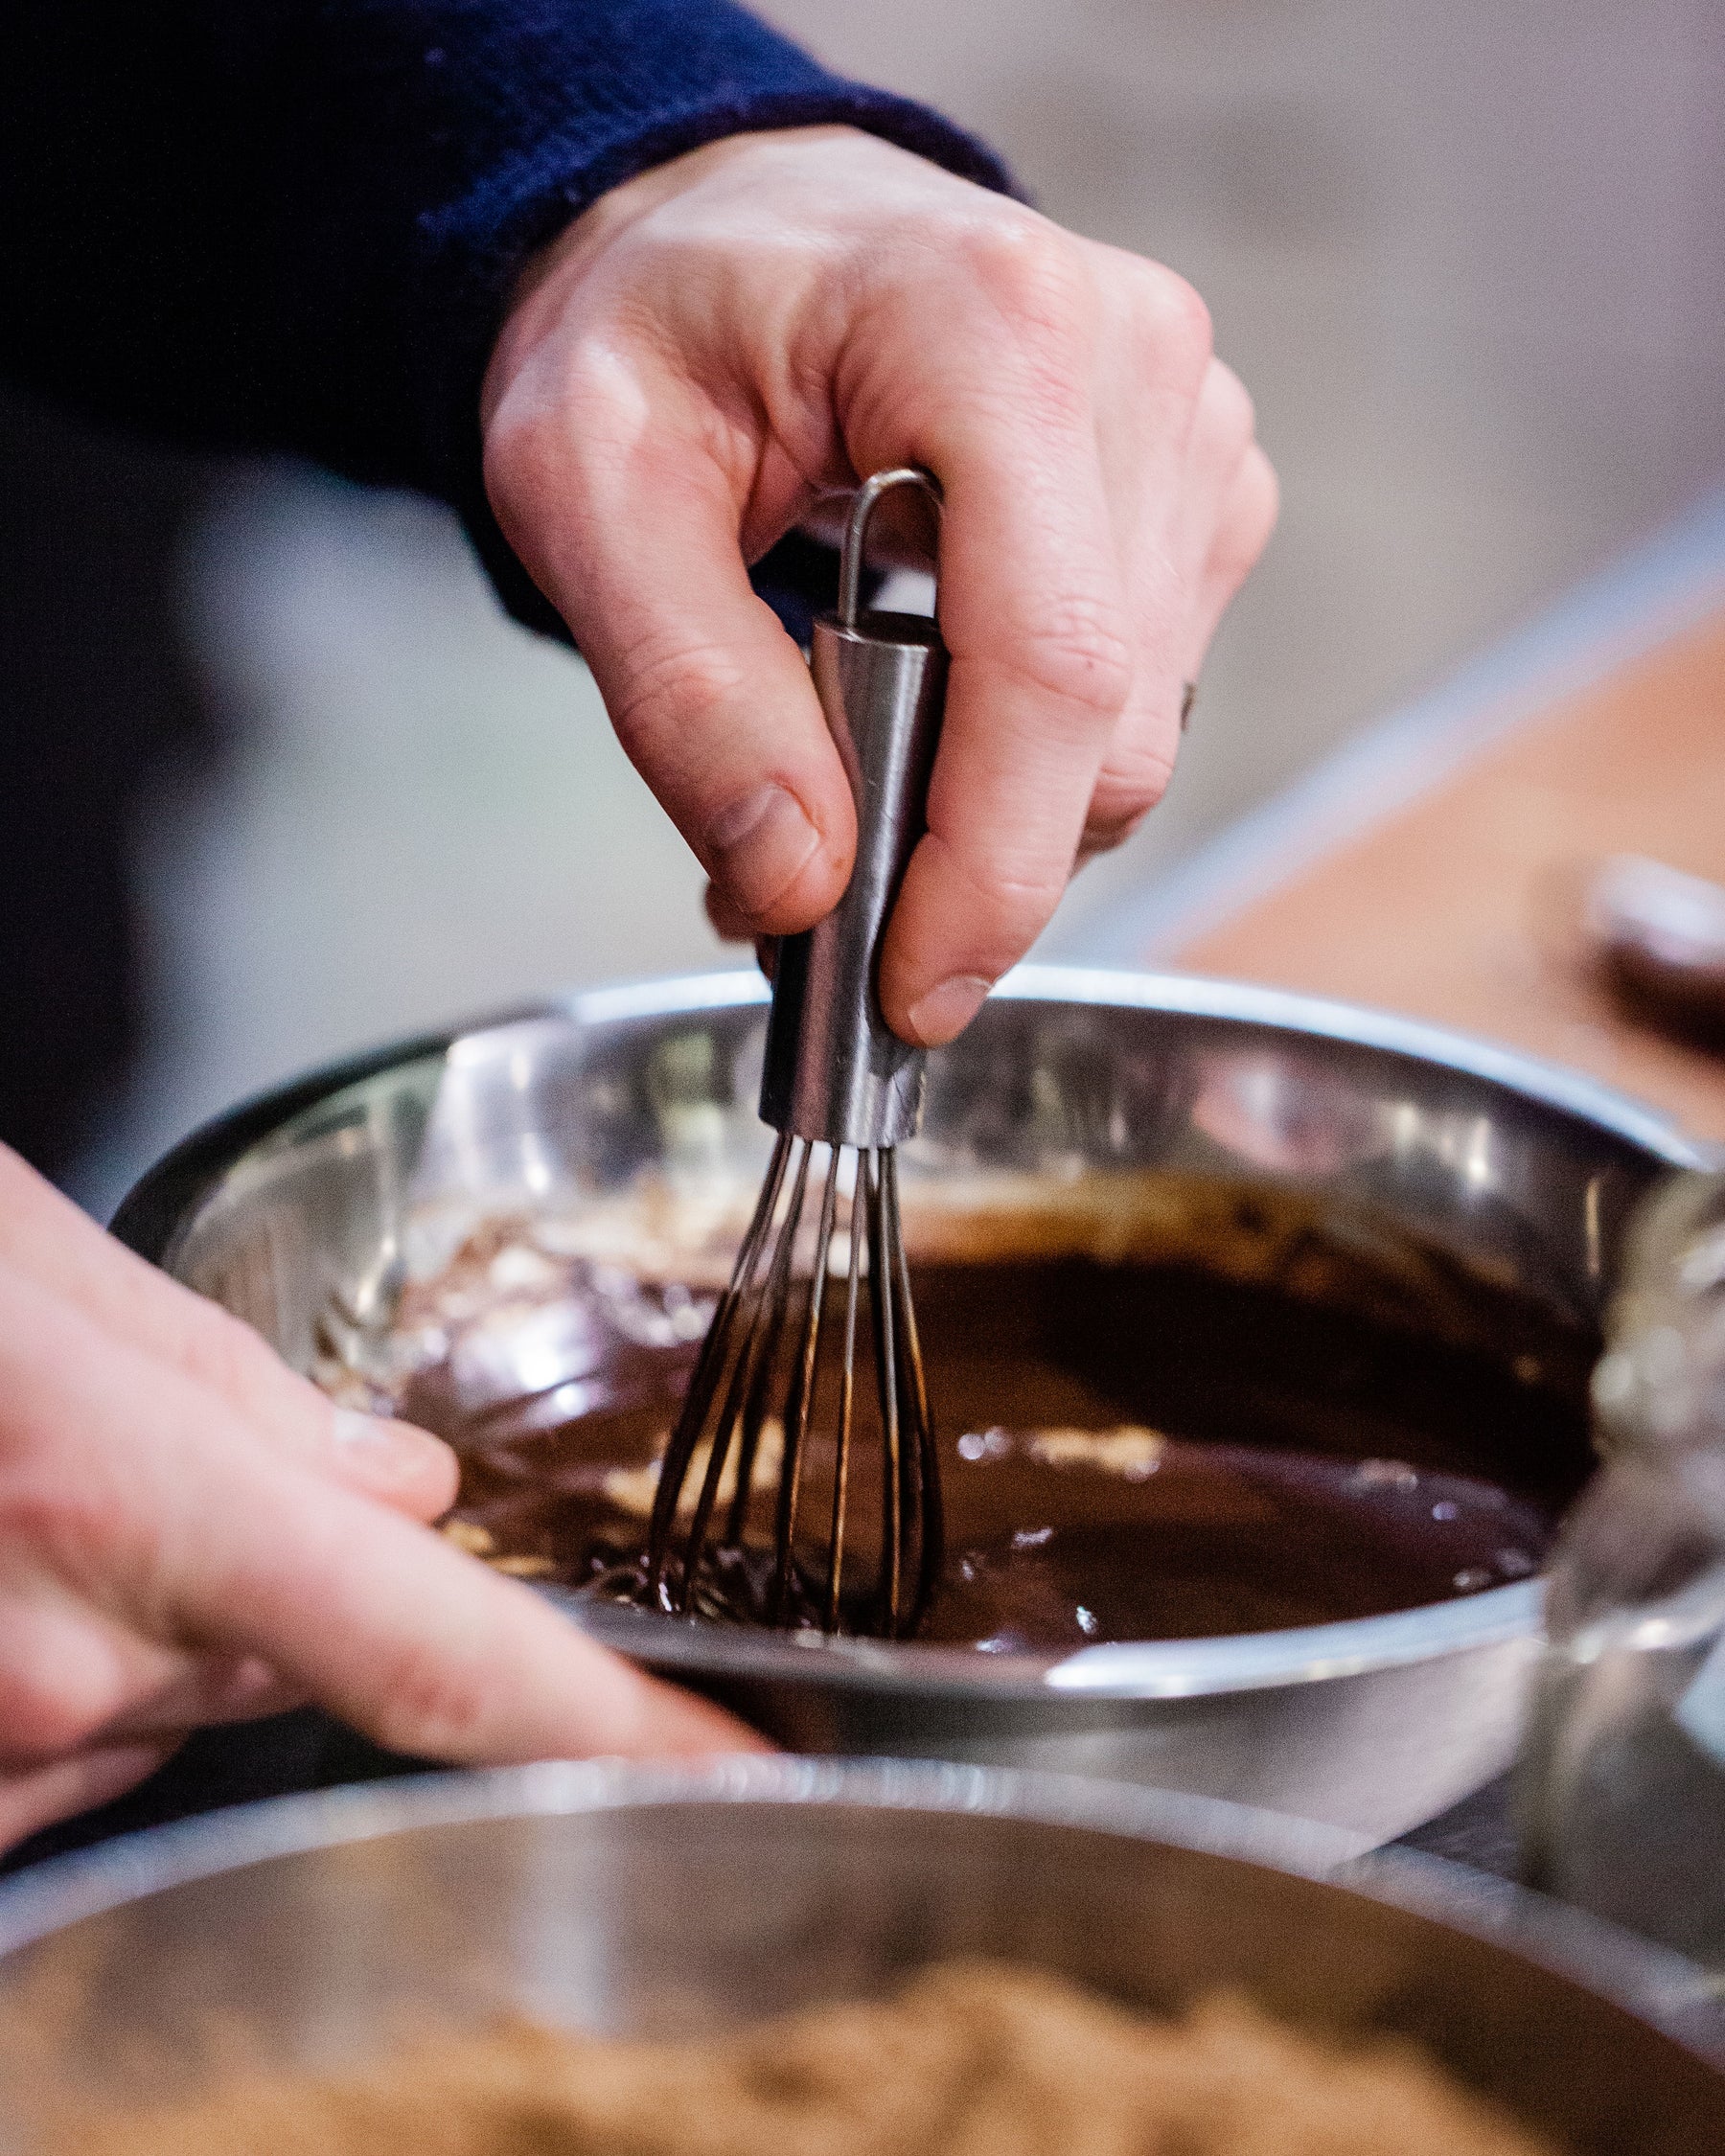 ChocoLove: Chocolate Making with Aphrodisiacs for Valentines - February 9th